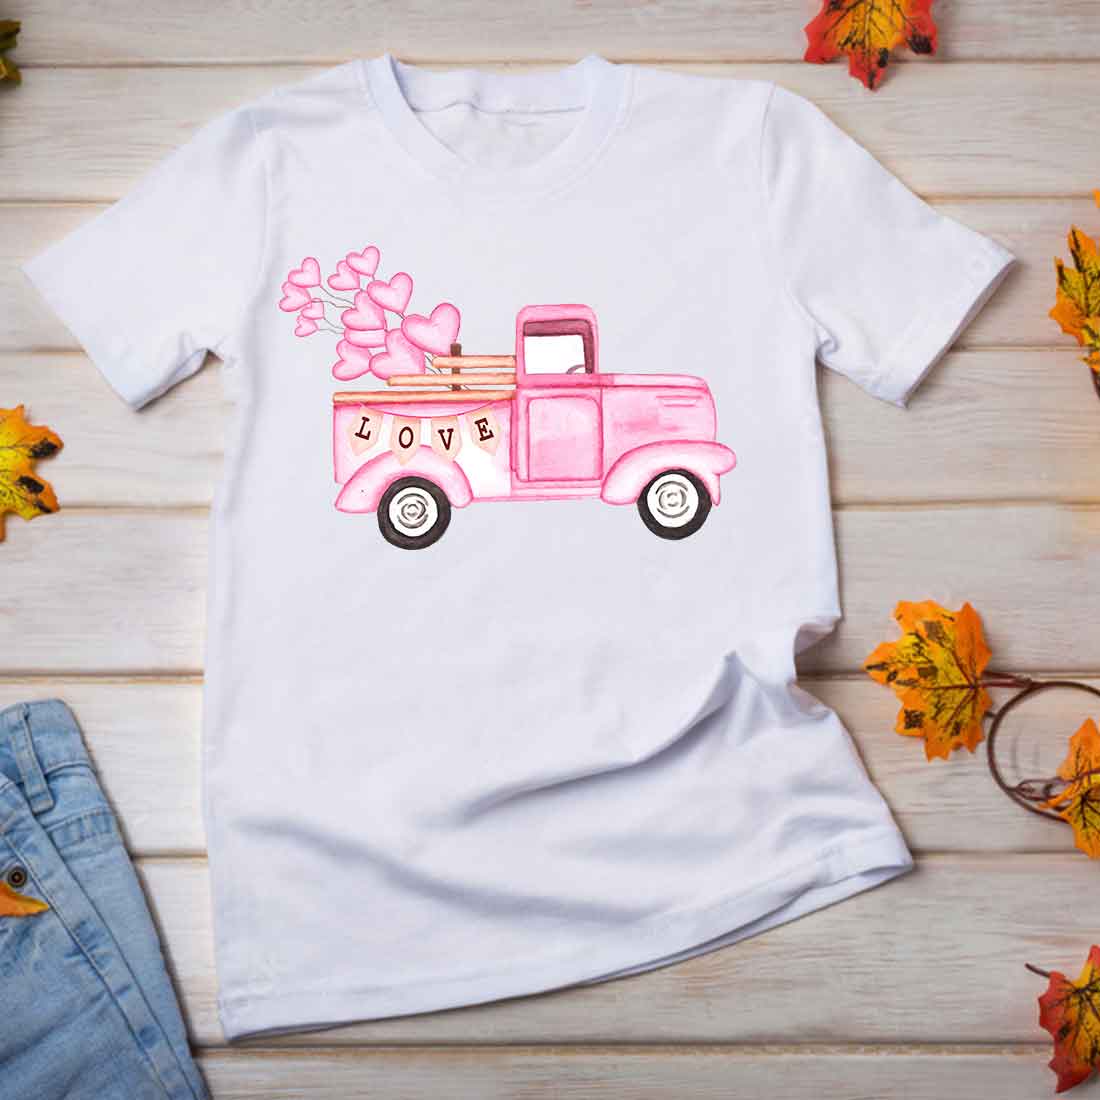 Image of a T-shirt with a unique pink truck print